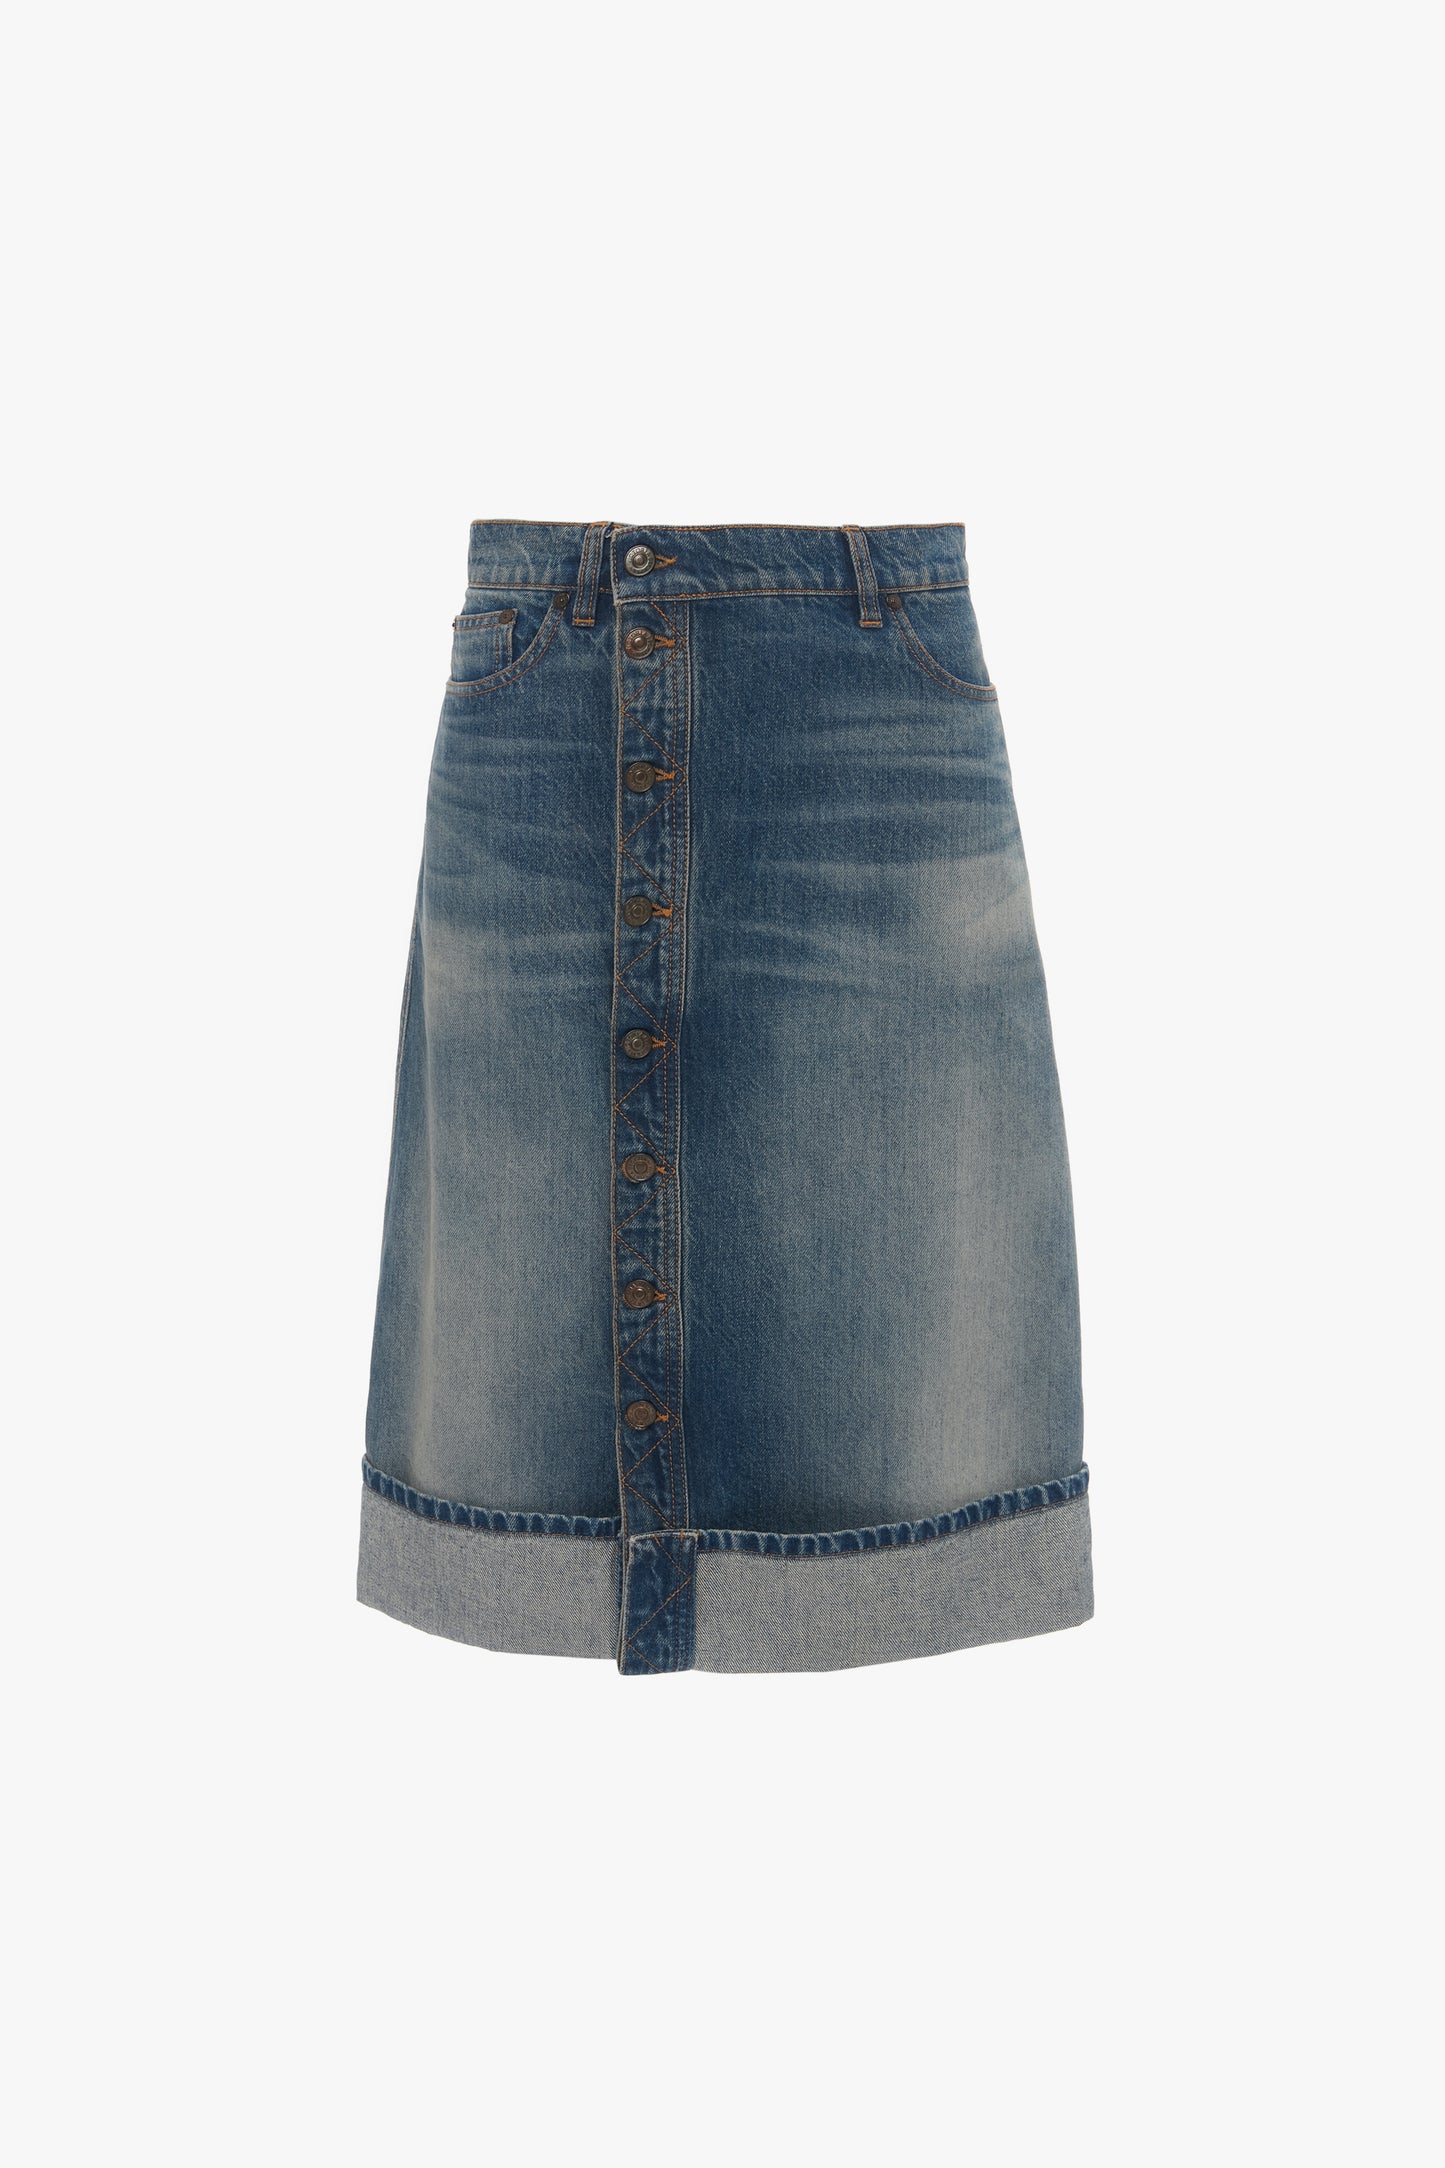 A knee-length luxury denim skirt with an asymmetric front placket closure, two front pockets, and a folded hem: the Placket Detail Denim Skirt In Heavy Vintage Indigo Wash by Victoria Beckham.